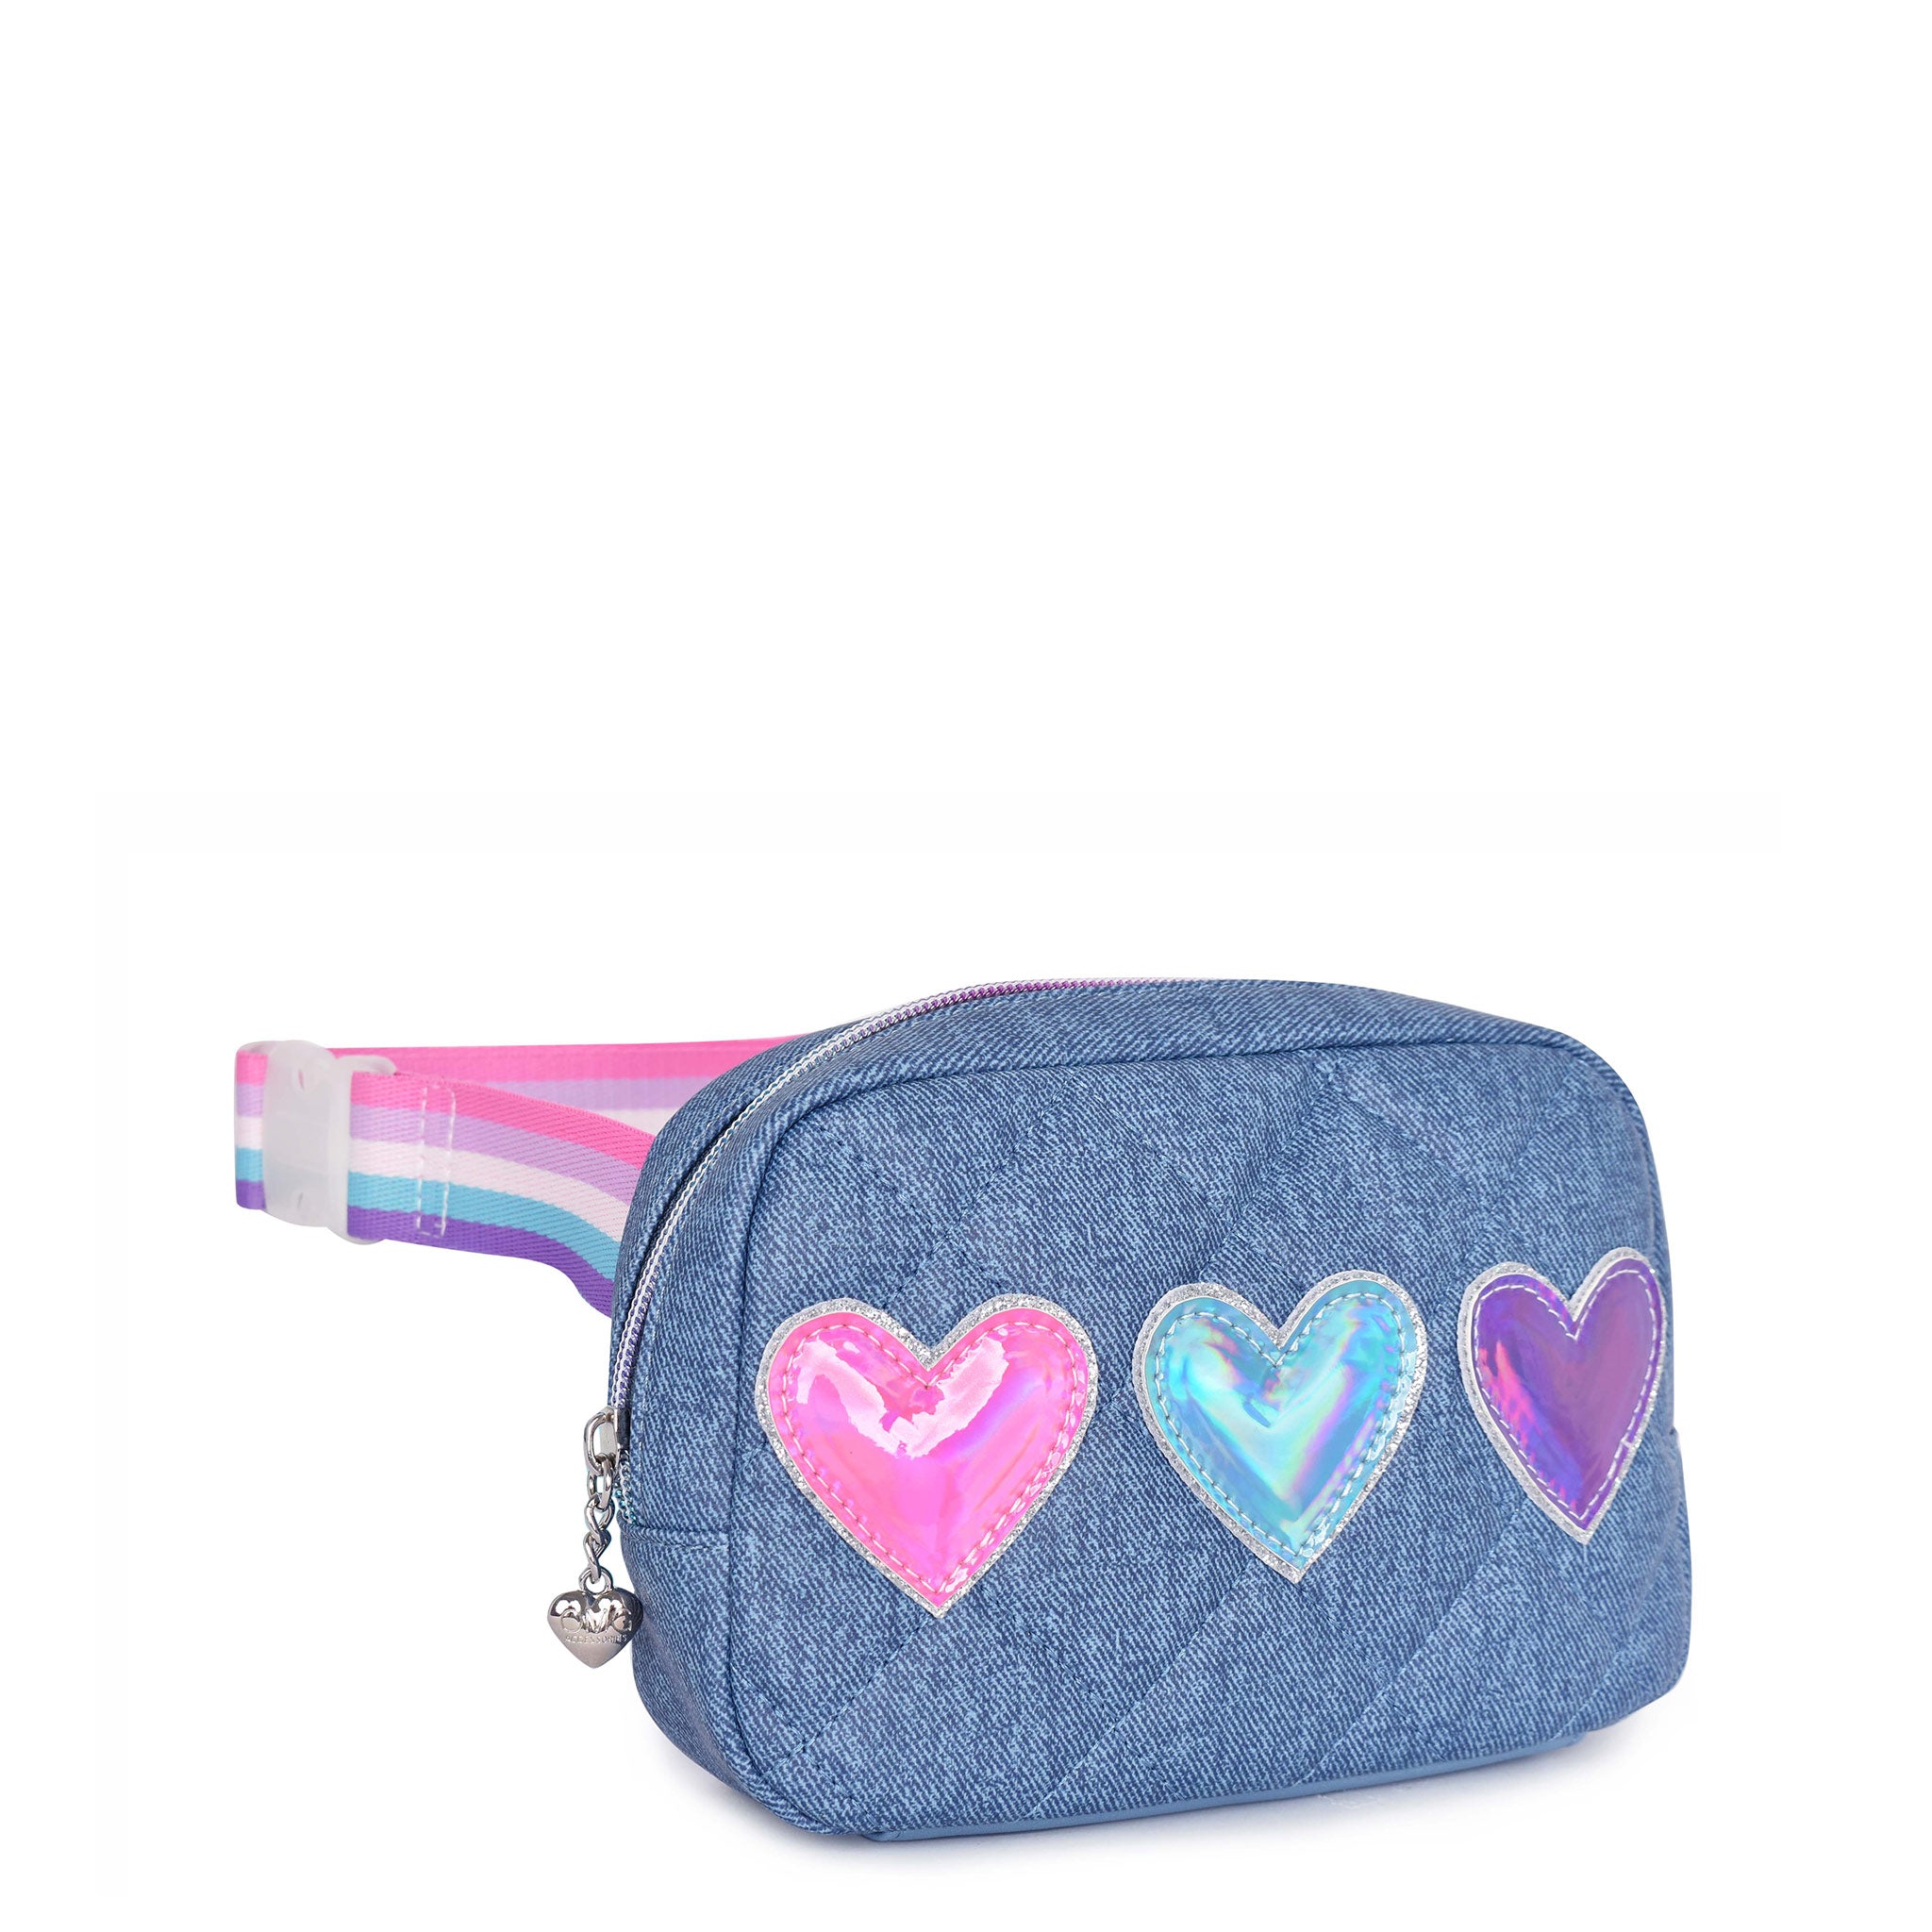 Side view of a denim quilted fanny pack with three metallic heart appliques